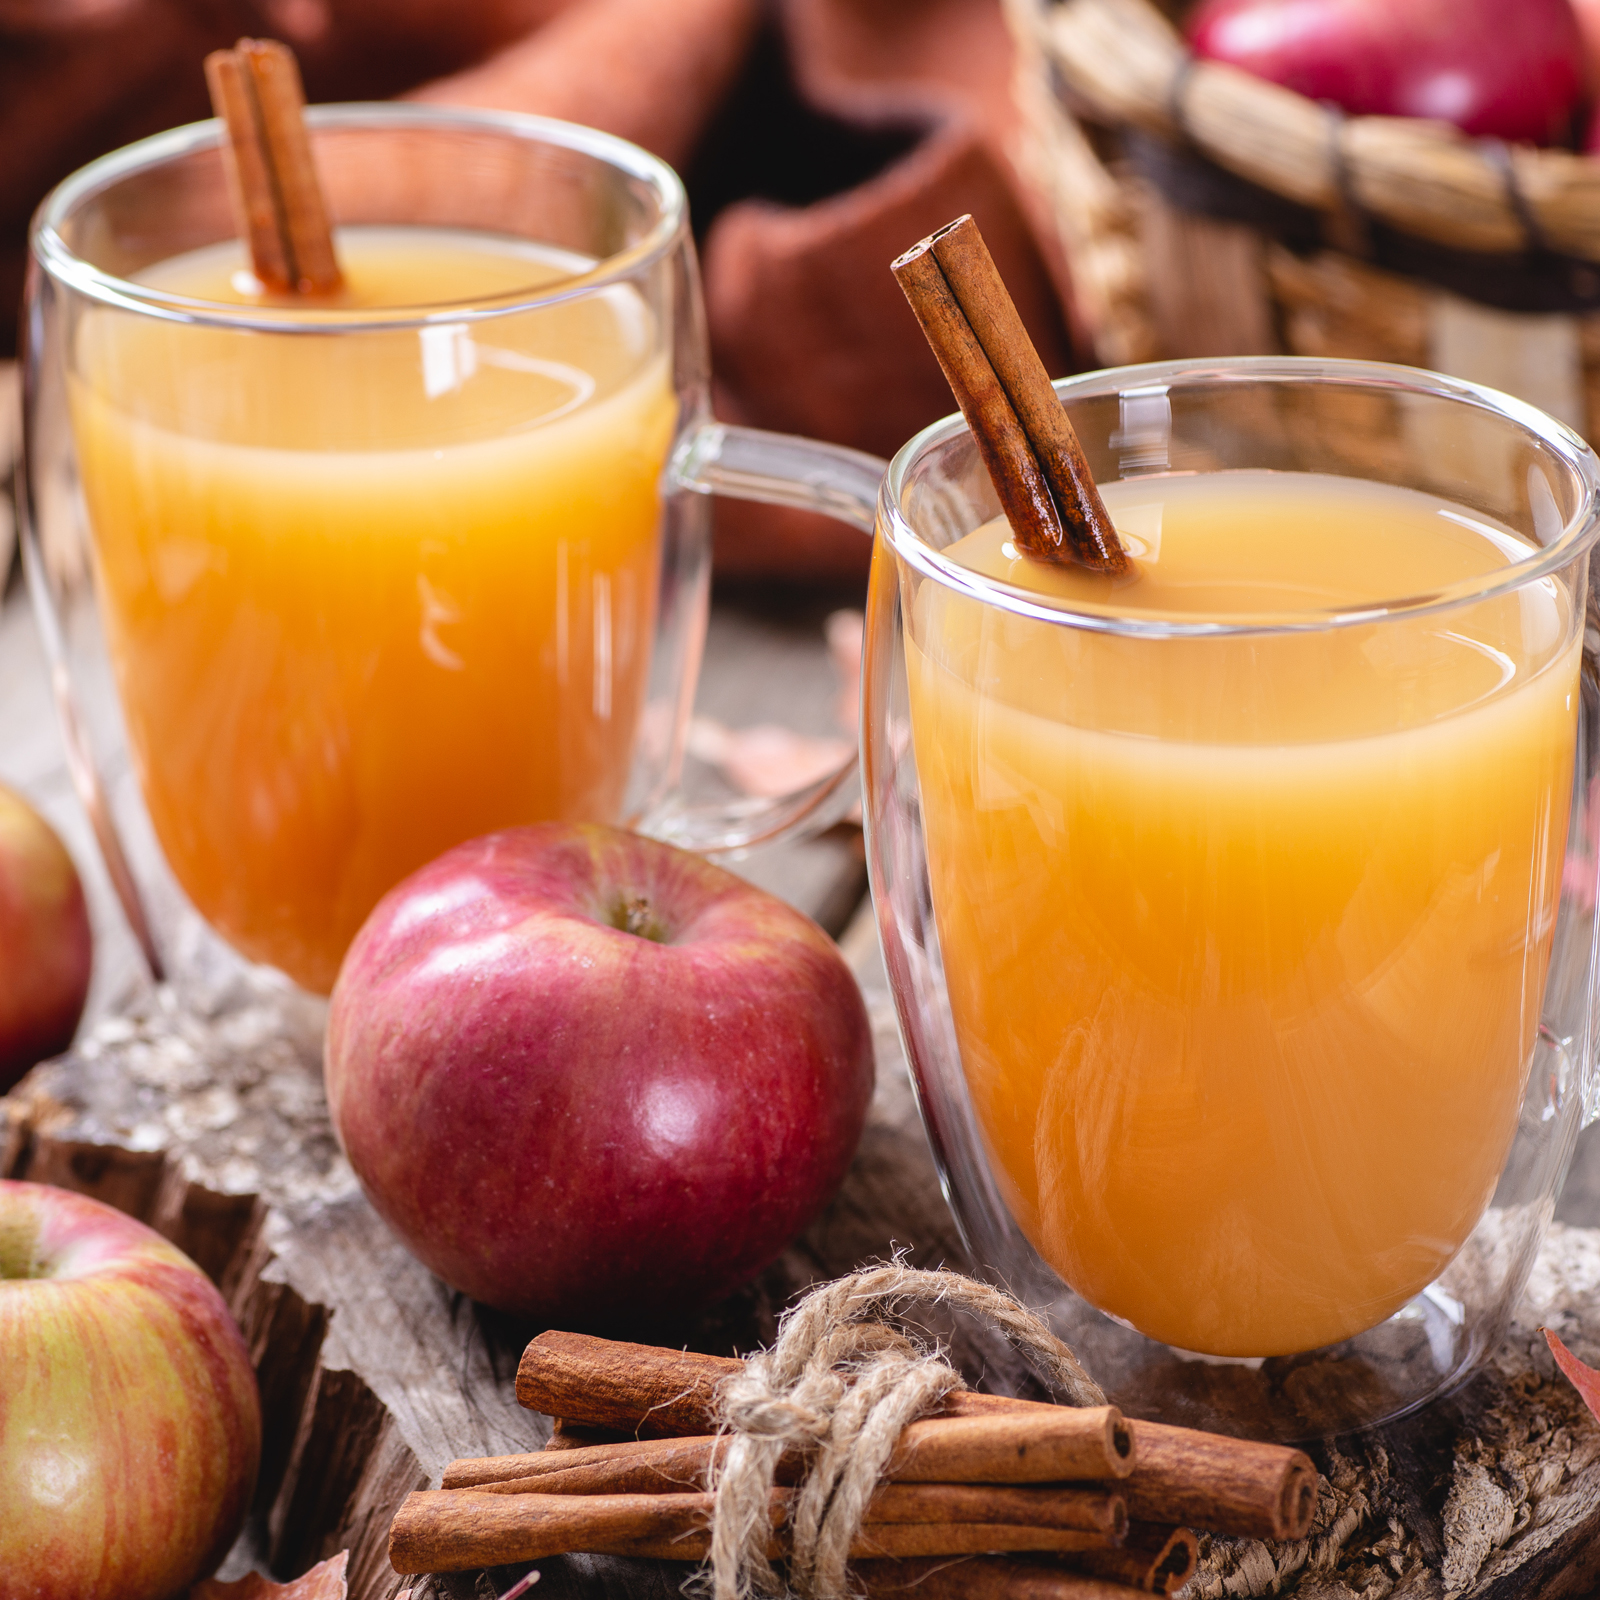 This easy and comforting hot apple cider drink is a perfect beverage to enjoy in the fall and winter months. Spiced just right with cinnamon, cloves, nutmeg, and allspice, it warms your soul and comforts your body